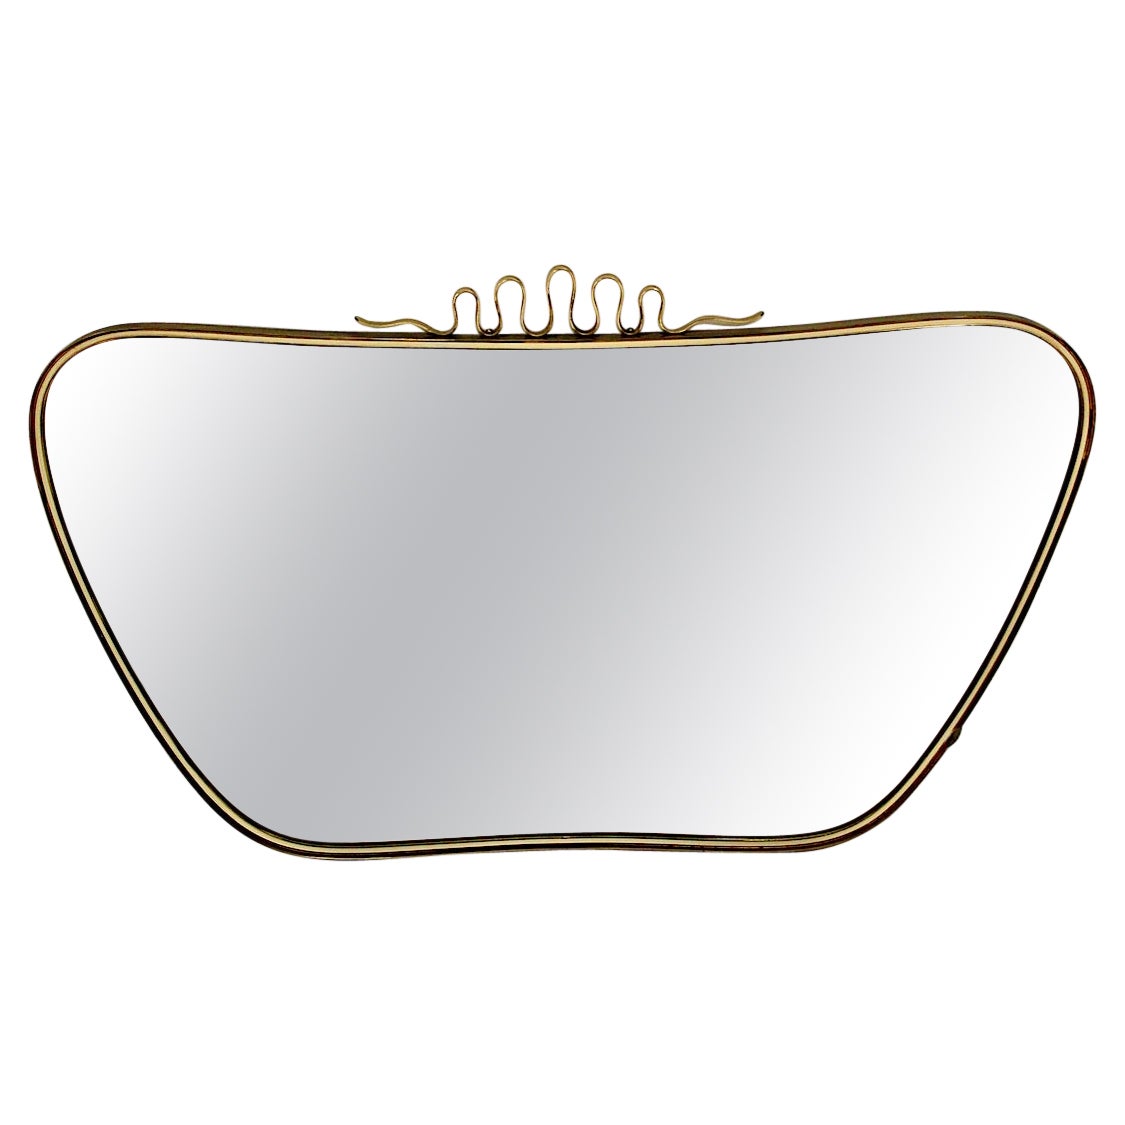 Mid-Century Modern Vintage Oval Wall Mirror Attributed Gio Ponti, 1950s, Italy